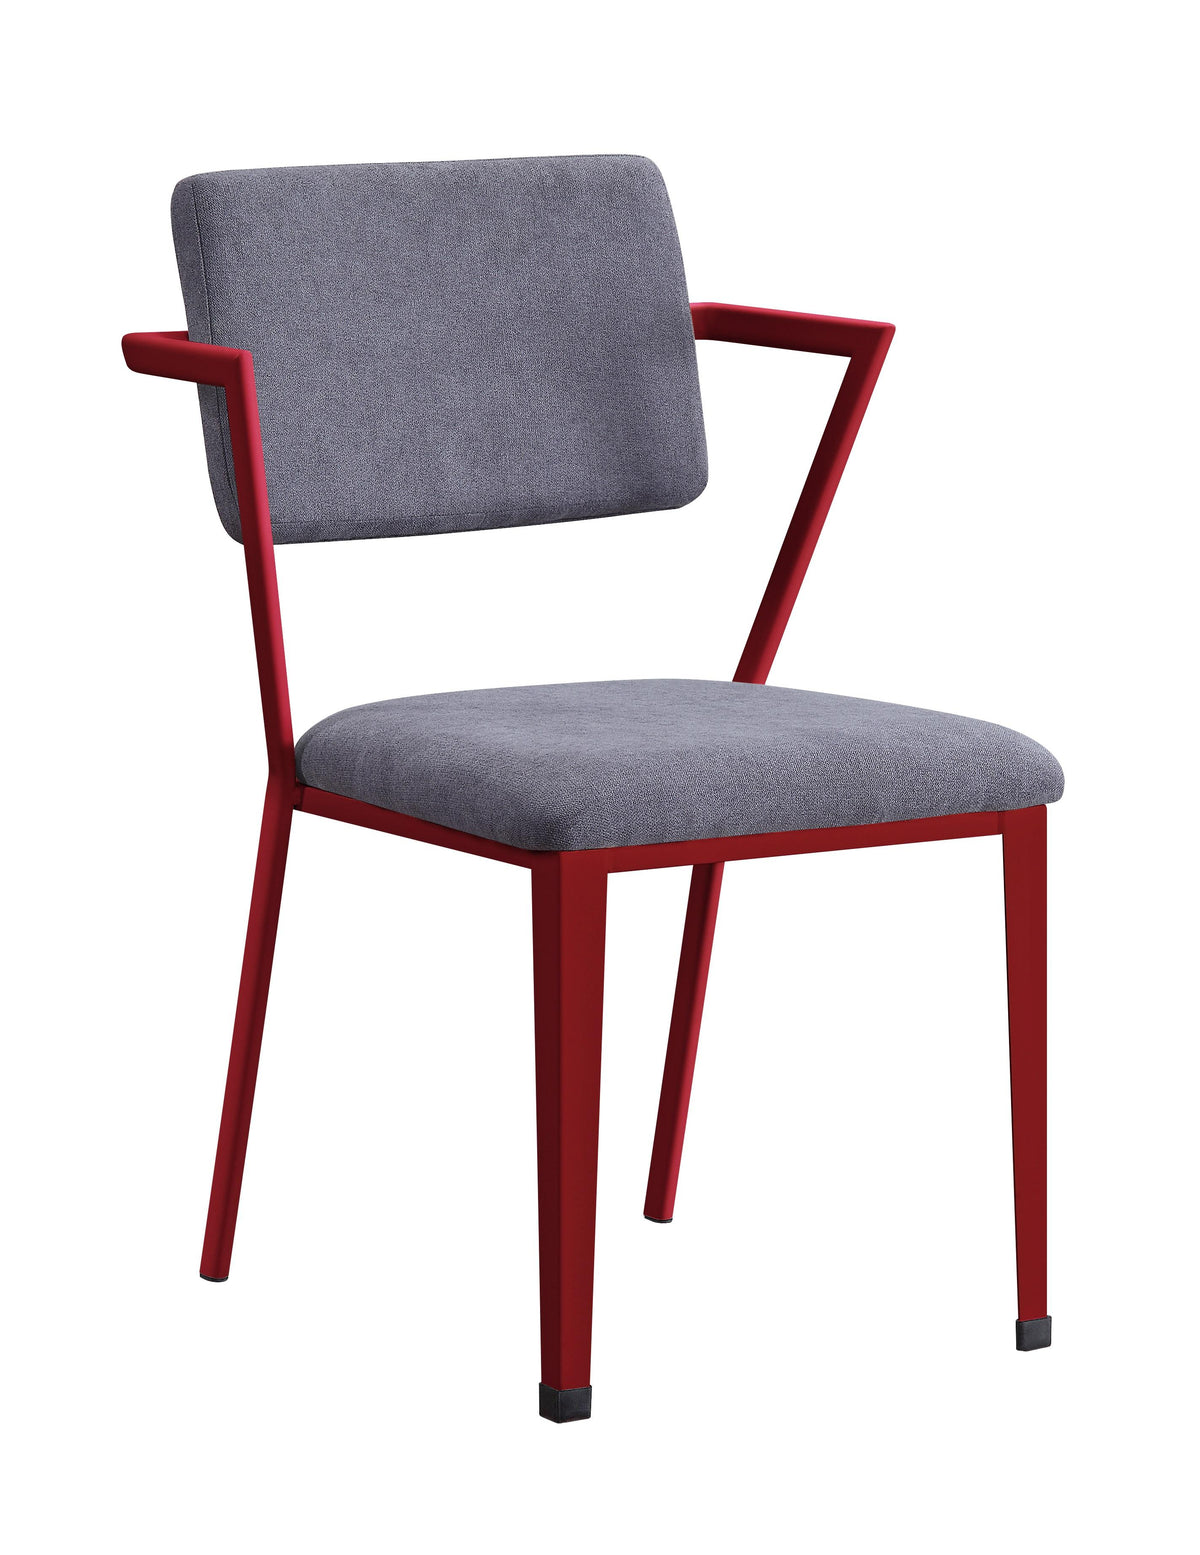 Cargo Gray Fabric & Red Chair  Las Vegas Furniture Stores